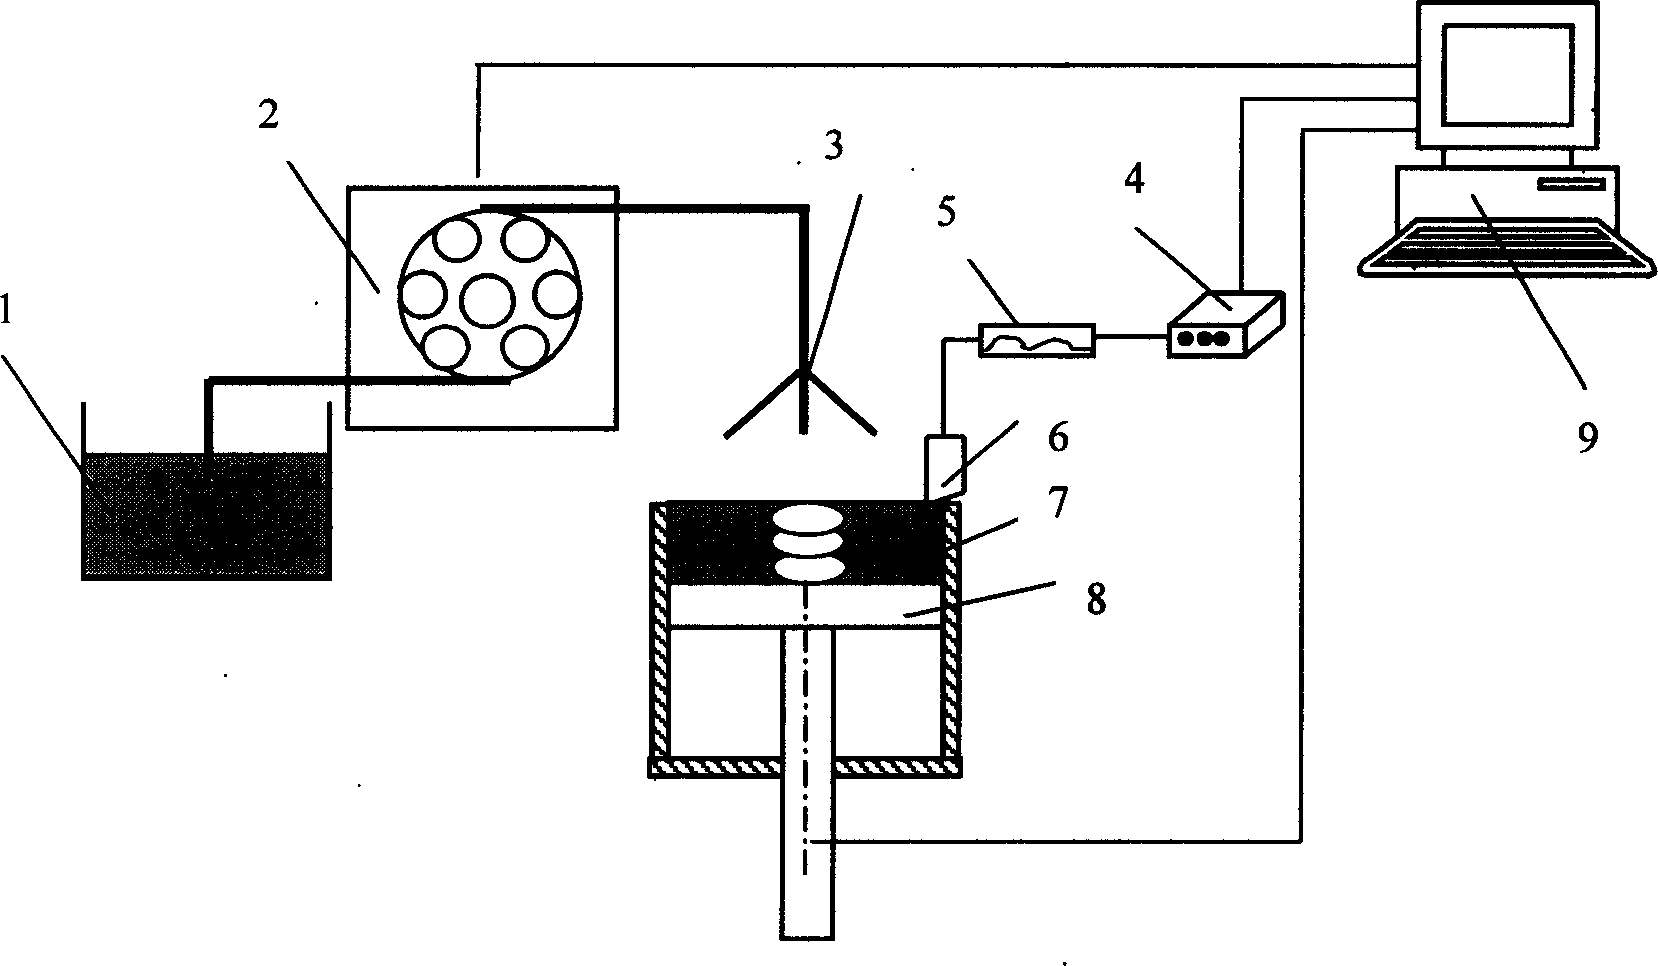 Resin coating apparatus for light solidifying rapid forming technique